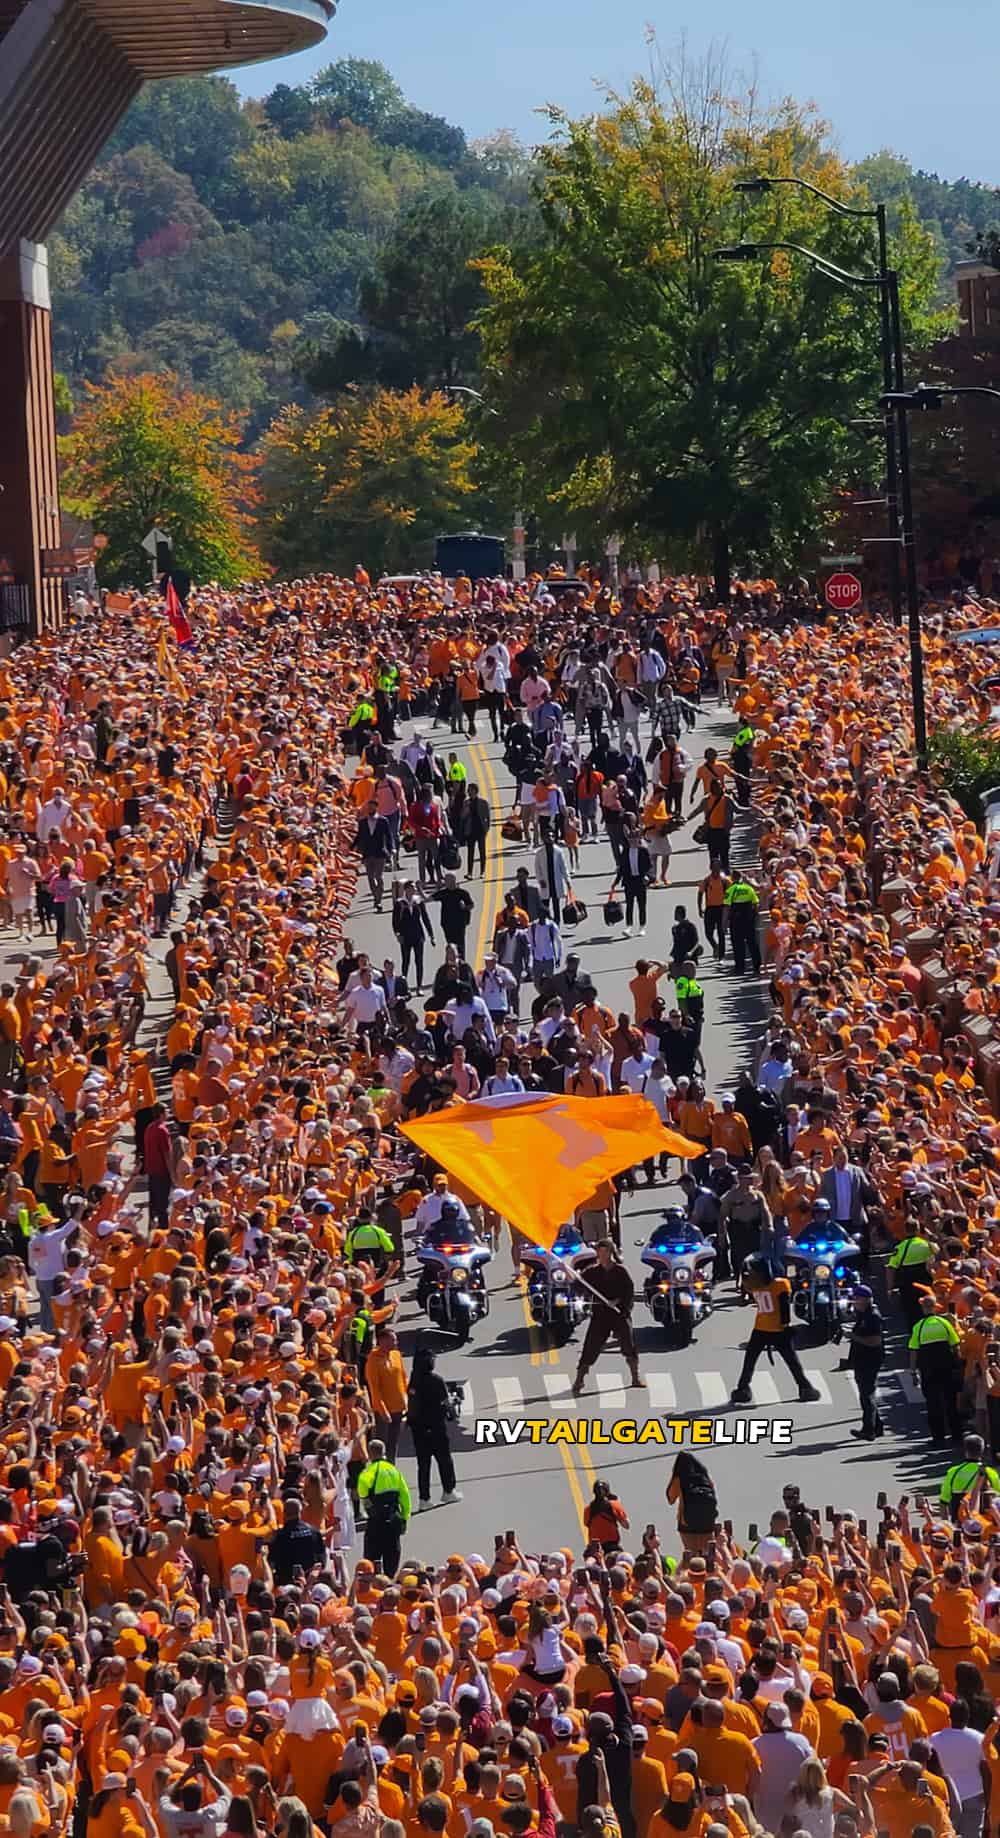 Vol Walk is where the Tennessee players come in to Neyland Stadium before a game. For the Tennessee-Alabama game, the crowd was intense and a sea of orange.